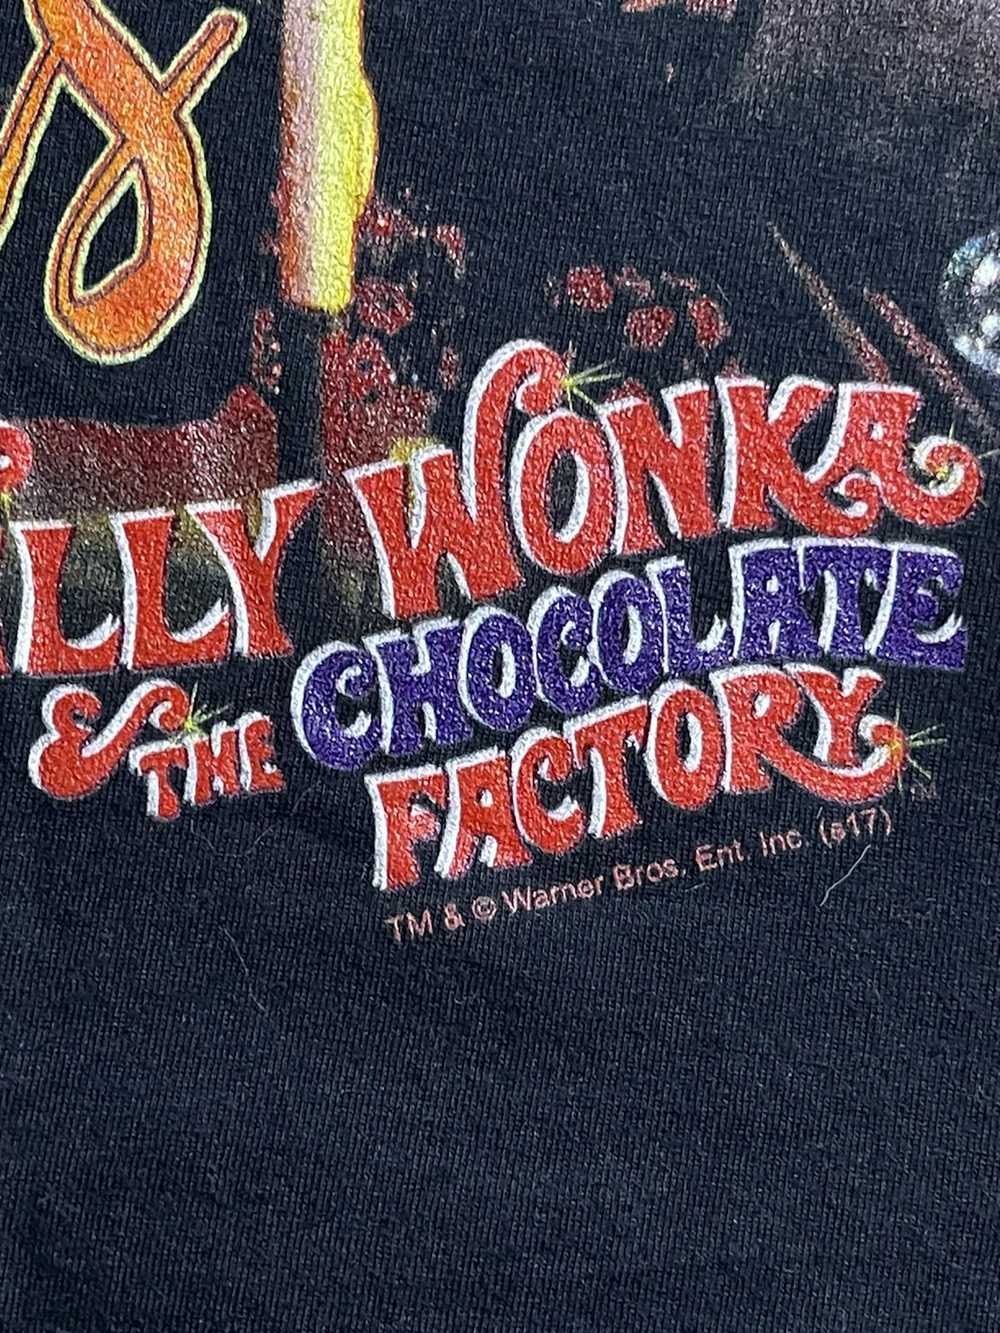 Warner Bros Willy Wonka & the Chocolate Factory T… - image 2